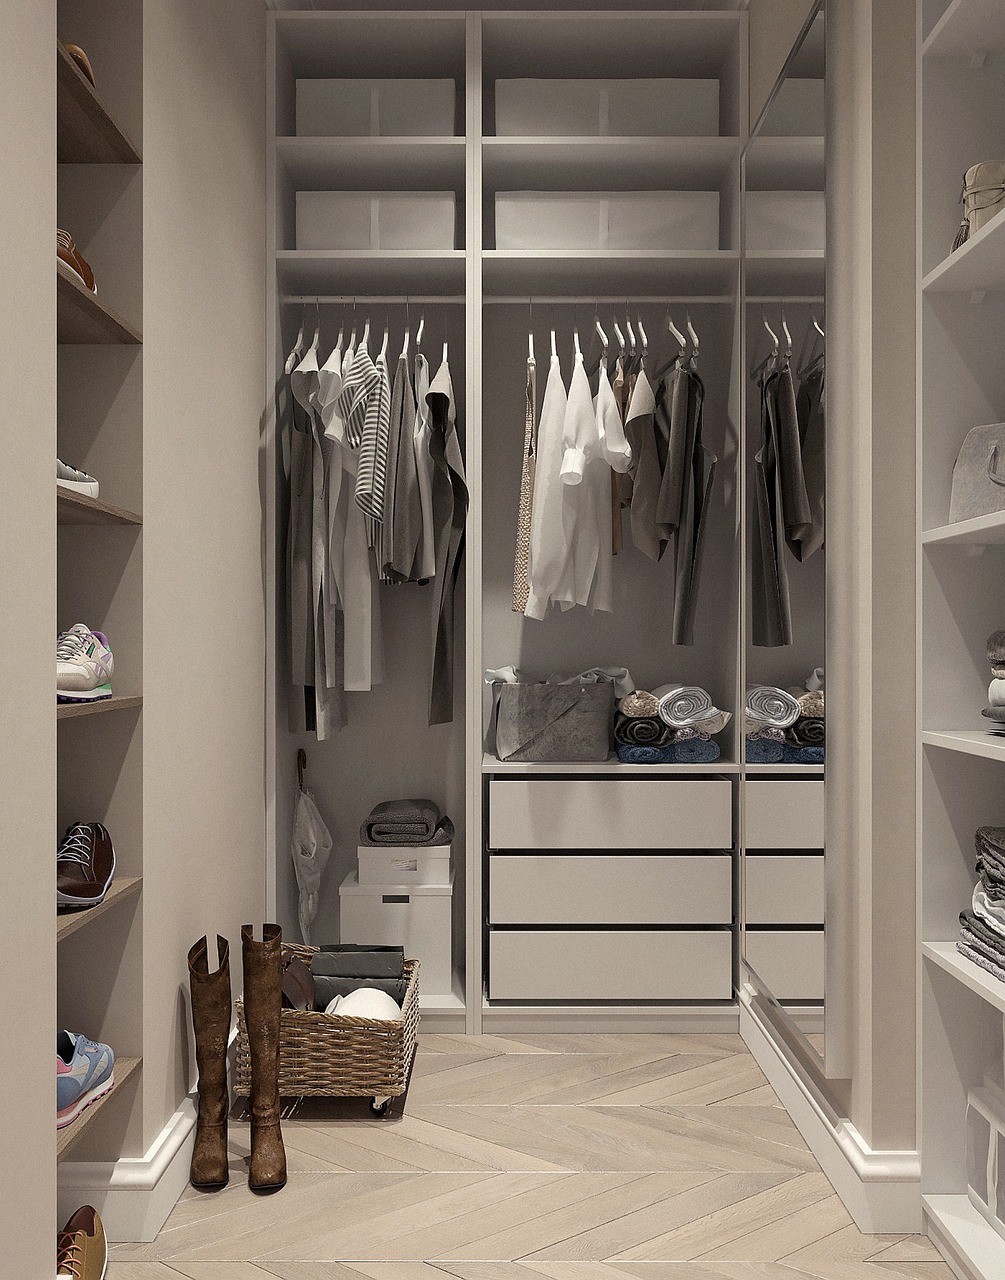 Maximizing Space: Organize Your Closet with Storage Baskets